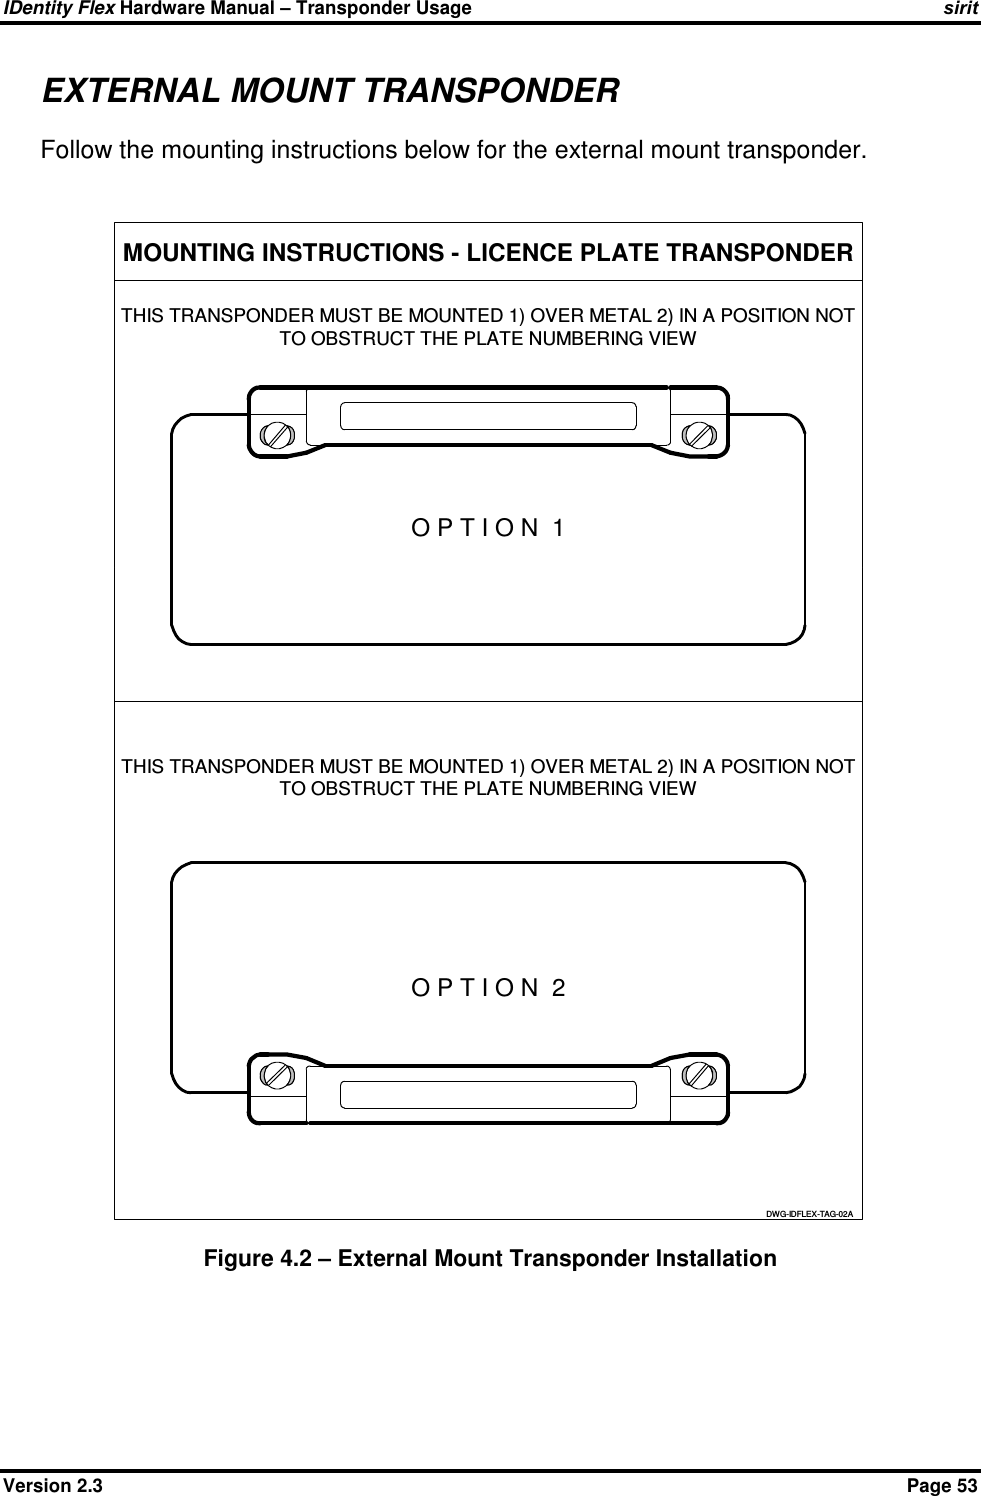 IDentity Flex Hardware Manual – Transponder Usage   sirit Version 2.3    Page 53 EXTERNAL MOUNT TRANSPONDER Follow the mounting instructions below for the external mount transponder.  Figure 4.2 – External Mount Transponder Installation  MOUNTING INSTRUCTIONS - LICENCE PLATE TRANSPONDERO P T I O N  1DWG-IDFLEX-TAG-02AO P T I O N  2THIS TRANSPONDER MUST BE MOUNTED 1) OVER METAL 2) IN A POSITION NOTTO OBSTRUCT THE PLATE NUMBERING VIEWTHIS TRANSPONDER MUST BE MOUNTED 1) OVER METAL 2) IN A POSITION NOTTO OBSTRUCT THE PLATE NUMBERING VIEW 